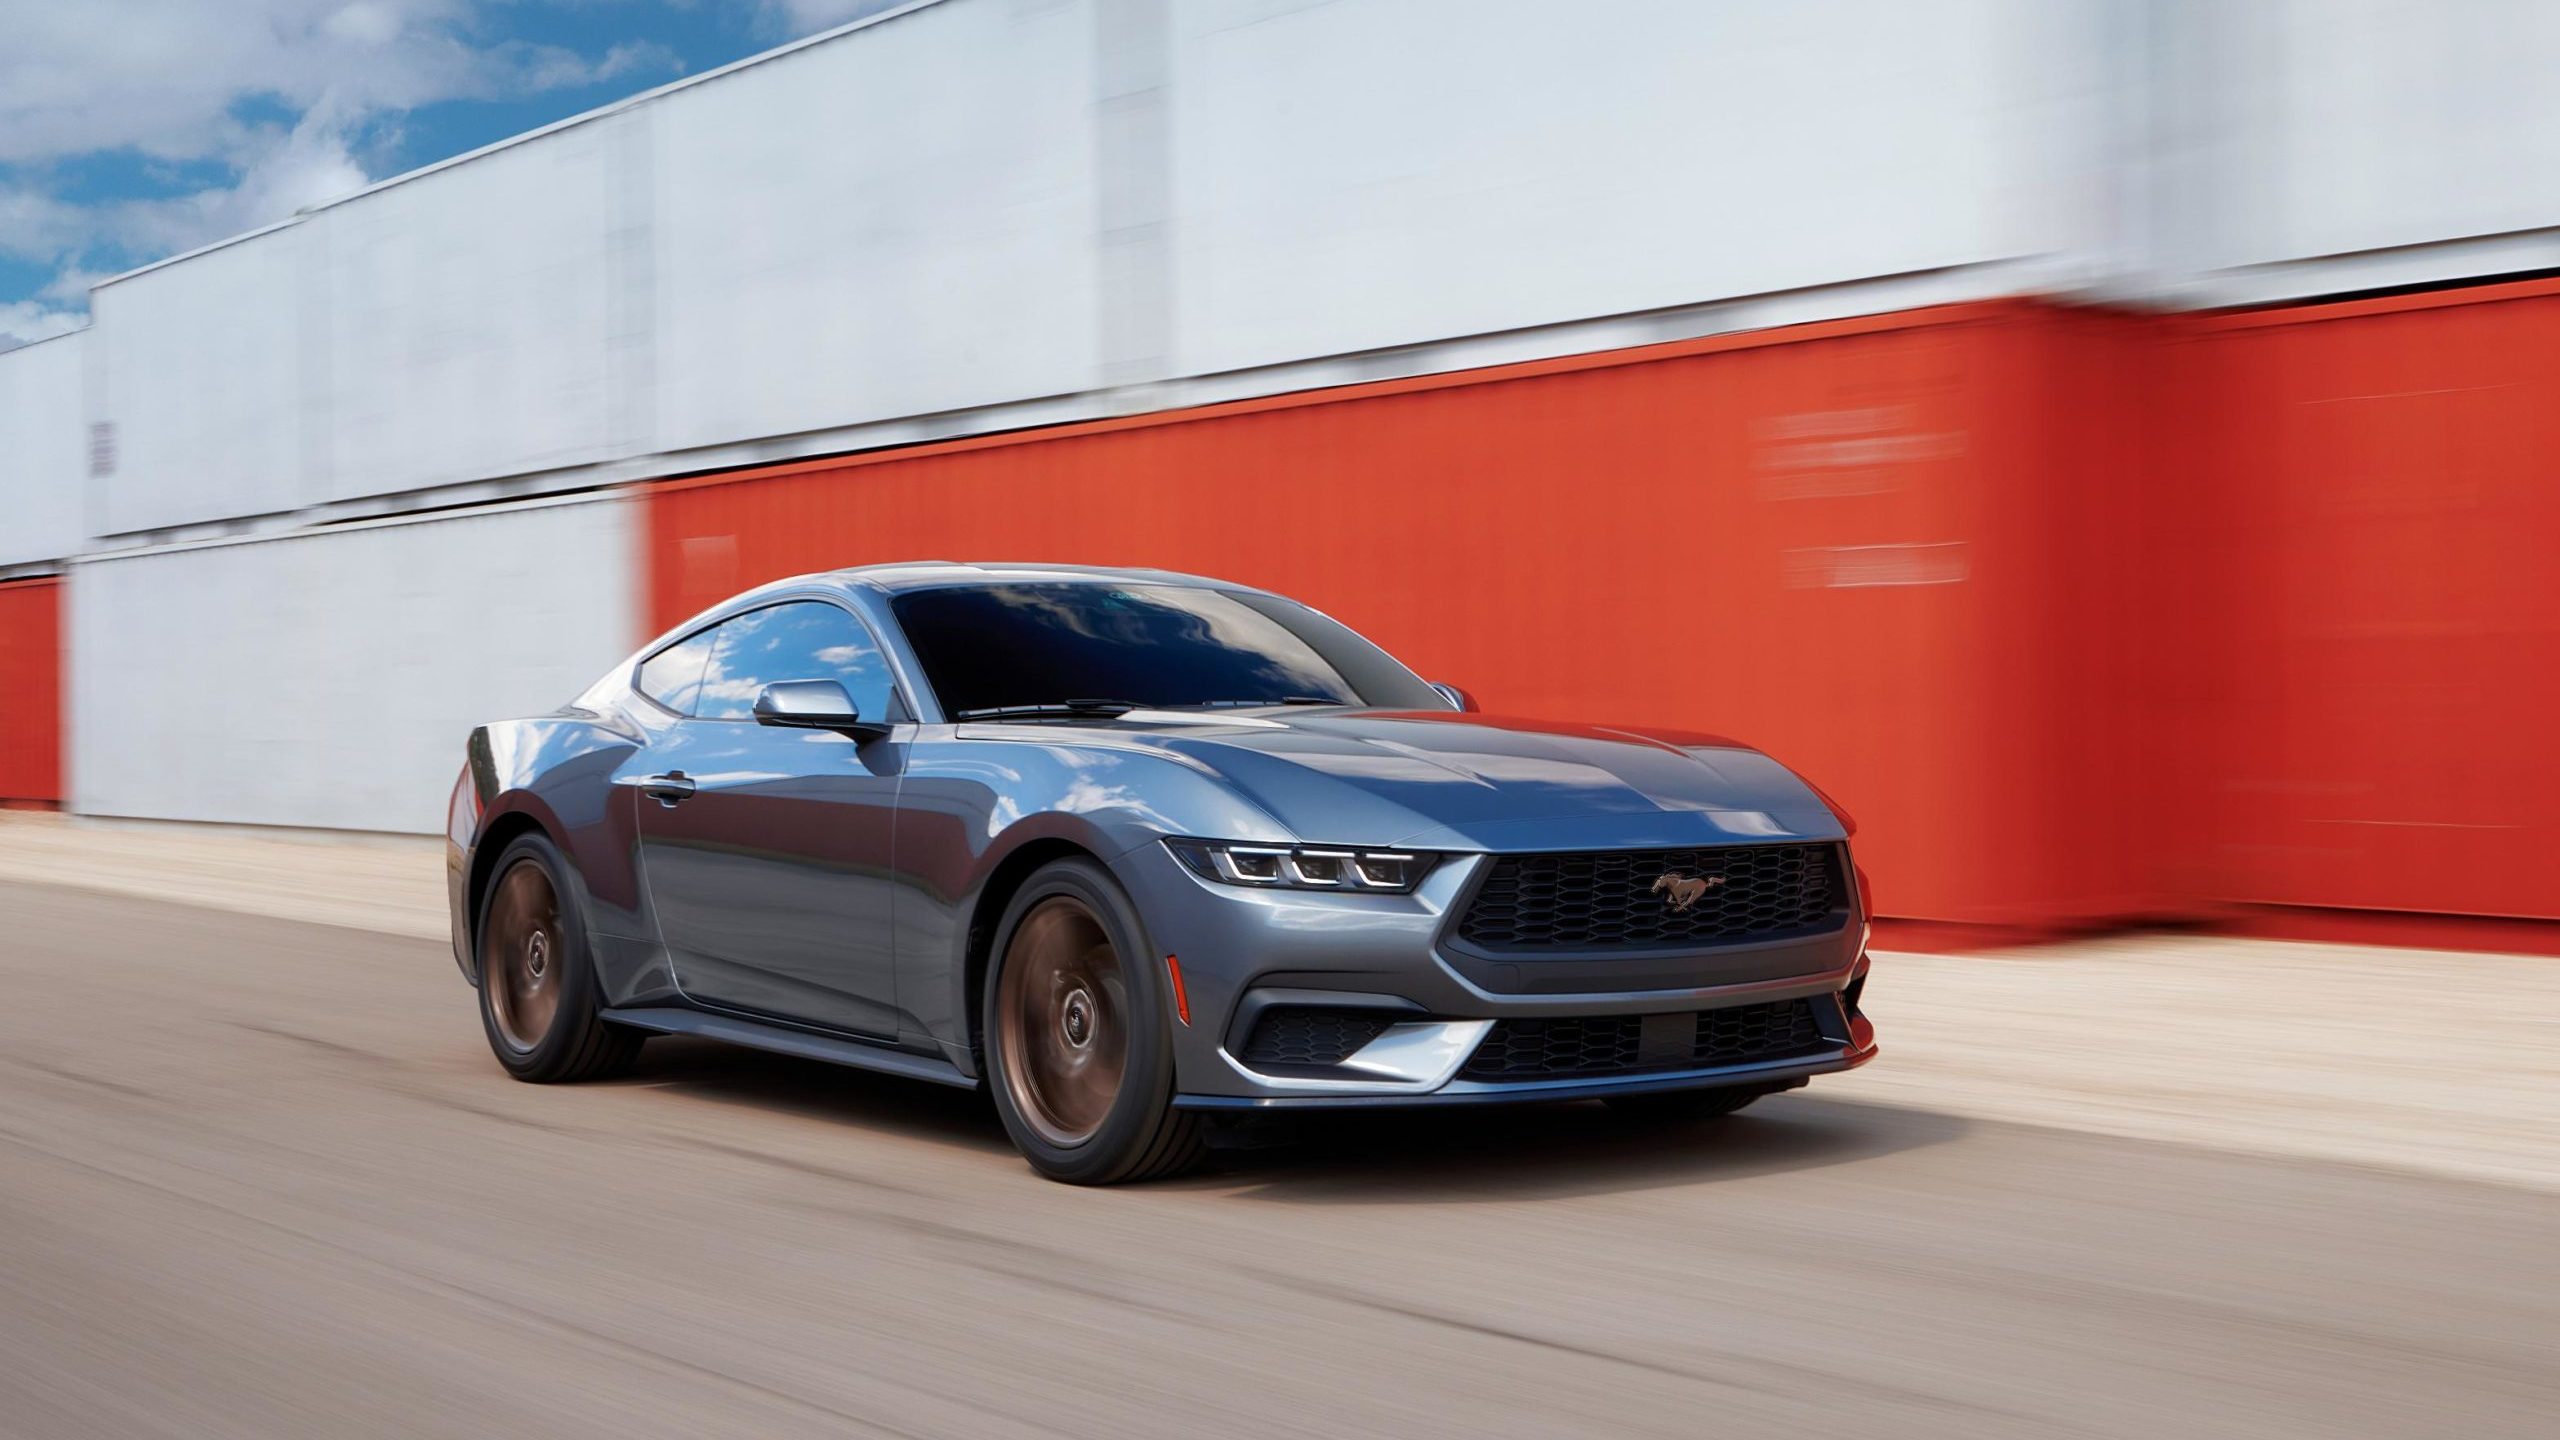 Ford just unveiled a new Mustang coupe that, notably, is not electric or even hybrid. The new two-d...